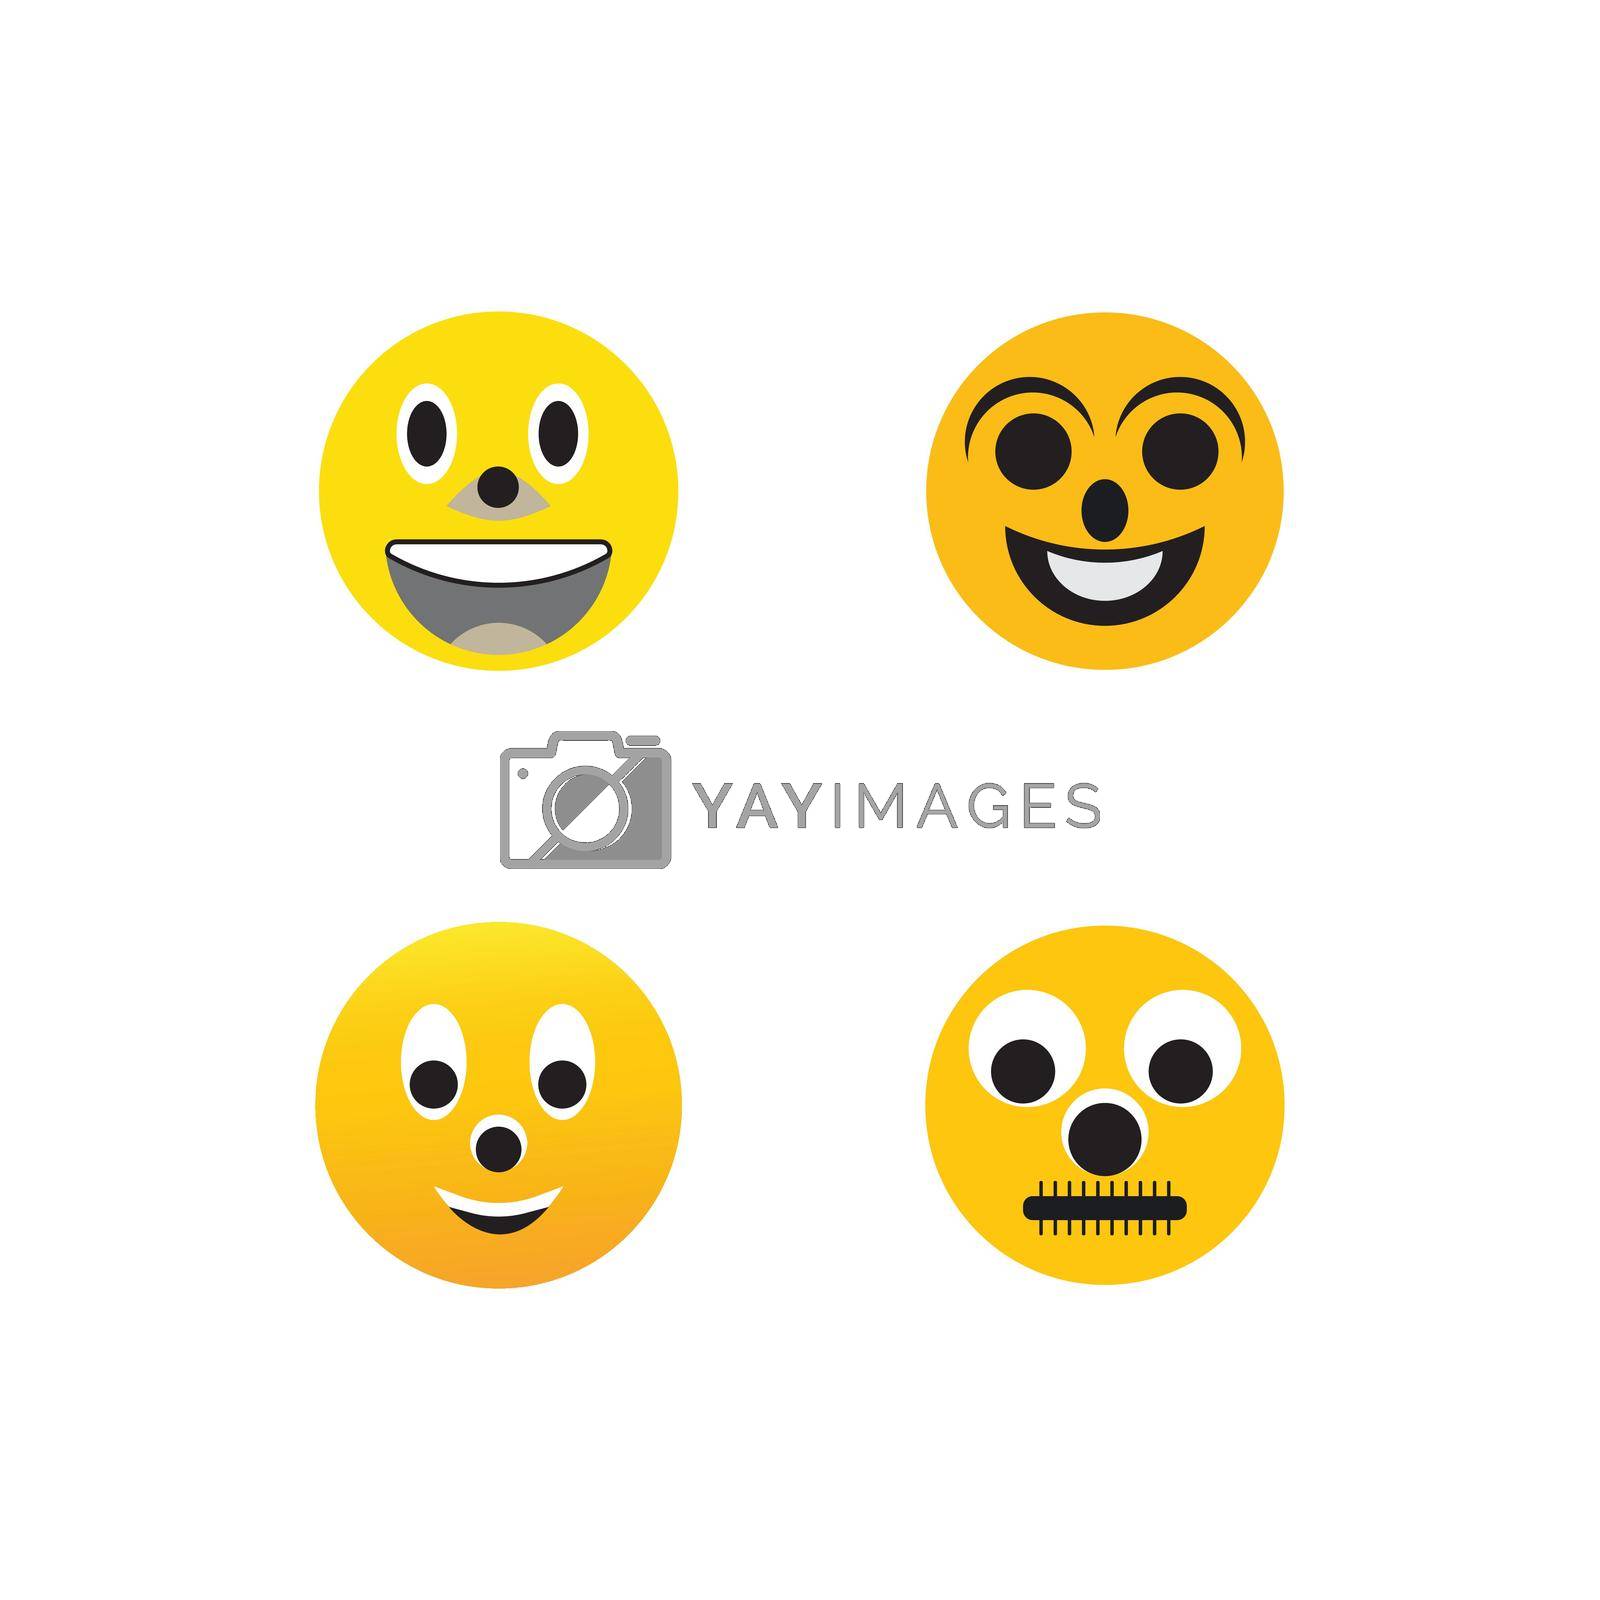 Royalty free image of Emoticon template face by hasan02